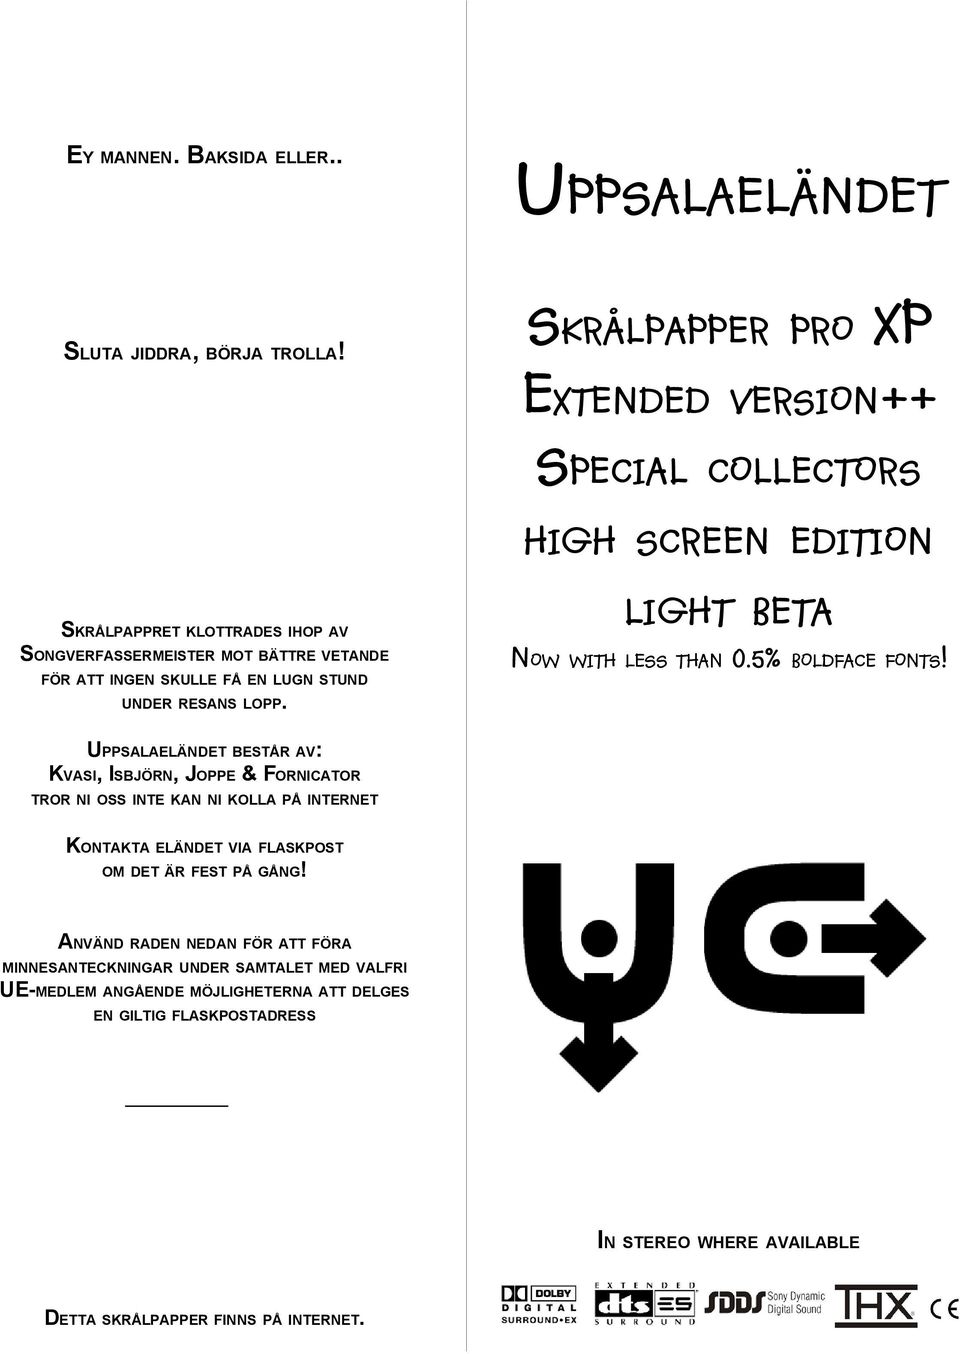 UPPSALAELÄNDET SKRÅLPAPPER PRO XP EXTENDED VERSION++ SPECIAL COLLECTORS HIGH SCREEN EDITION LIGHT BETA NOW WITH LESS THAN 0.5% BOLDFACE FONTS!